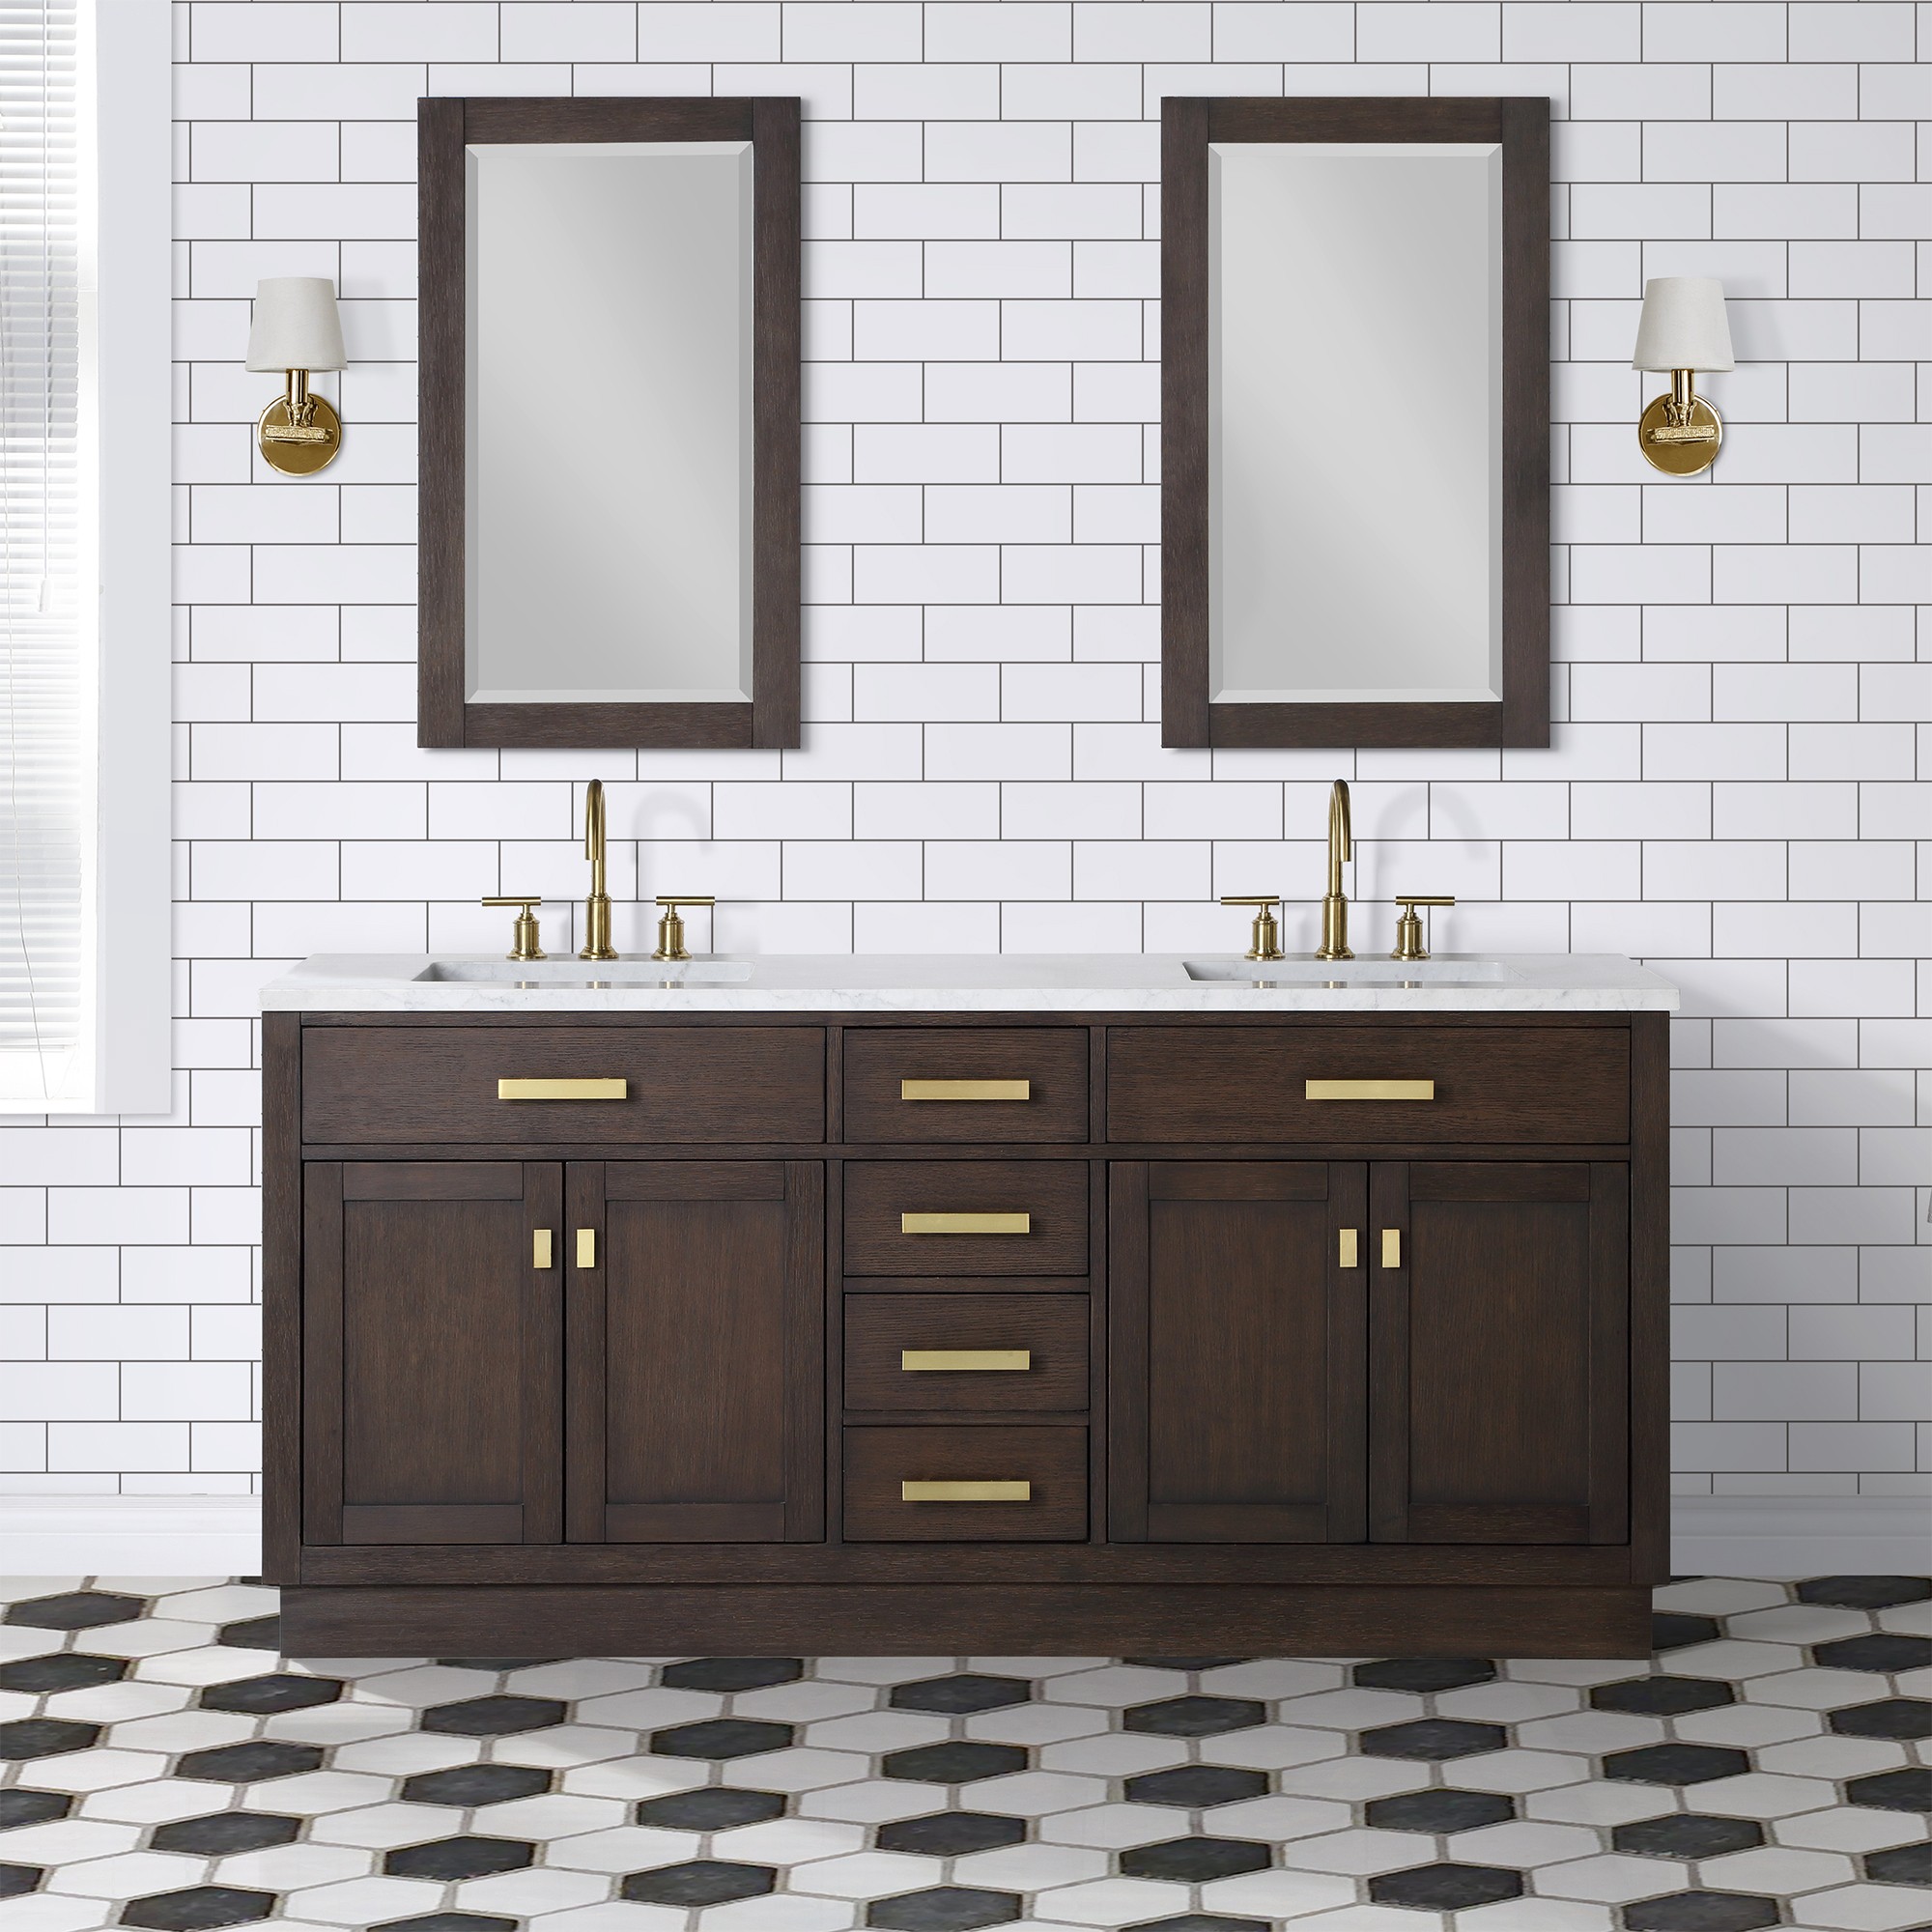 WATER-CREATION CH72CW06BK-R21BL1406 CHESTNUT 72 INCH DOUBLE BATHROOM VANITY WITH MIRRORS IN BROWN OAK